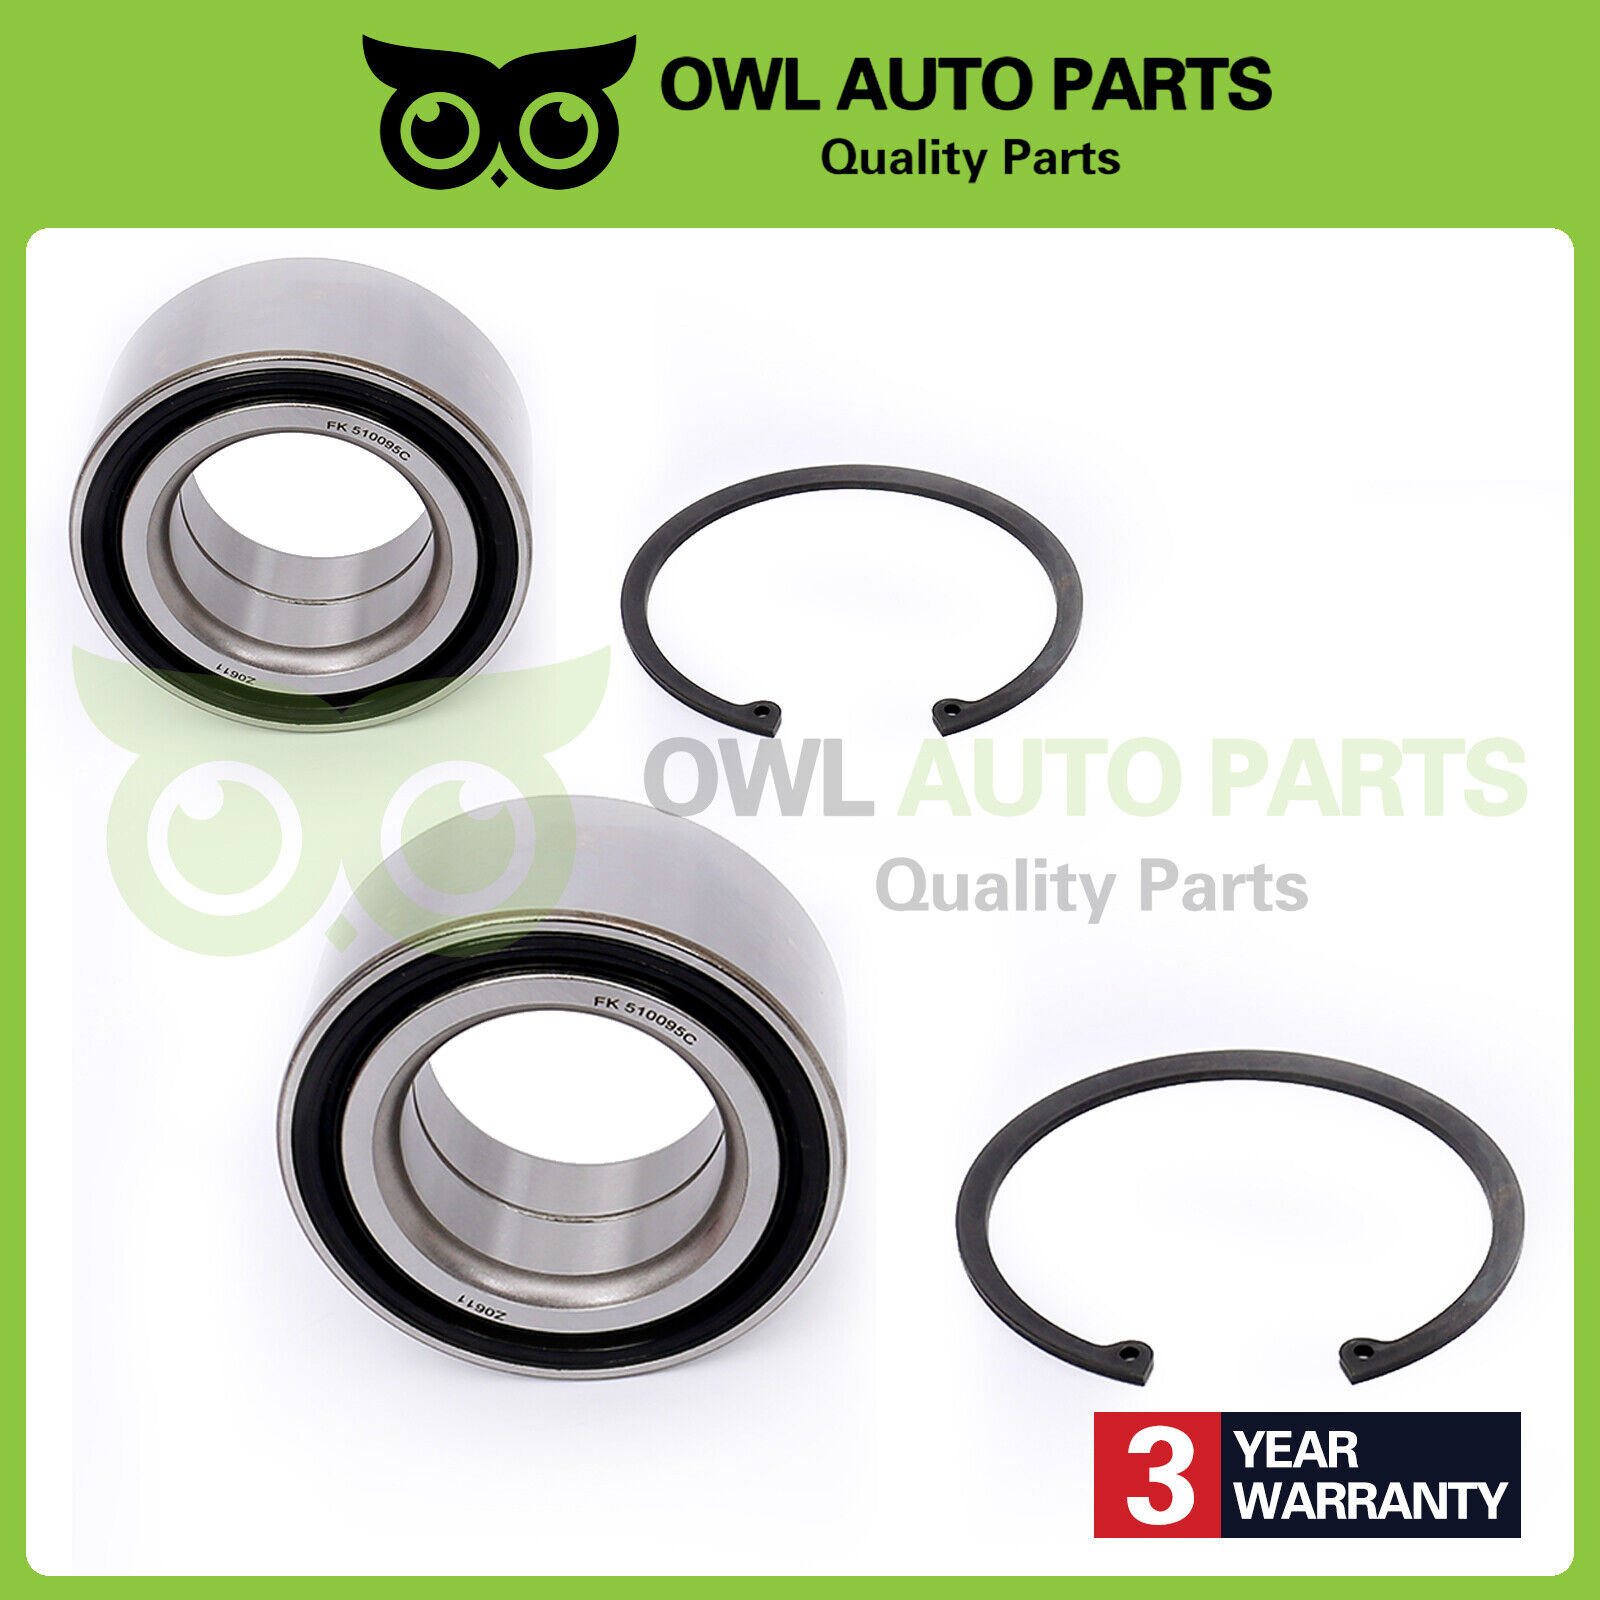 Pair Front Wheel Bearing For specialty shop Accord sale Acura 08-13 Honda Crosstour